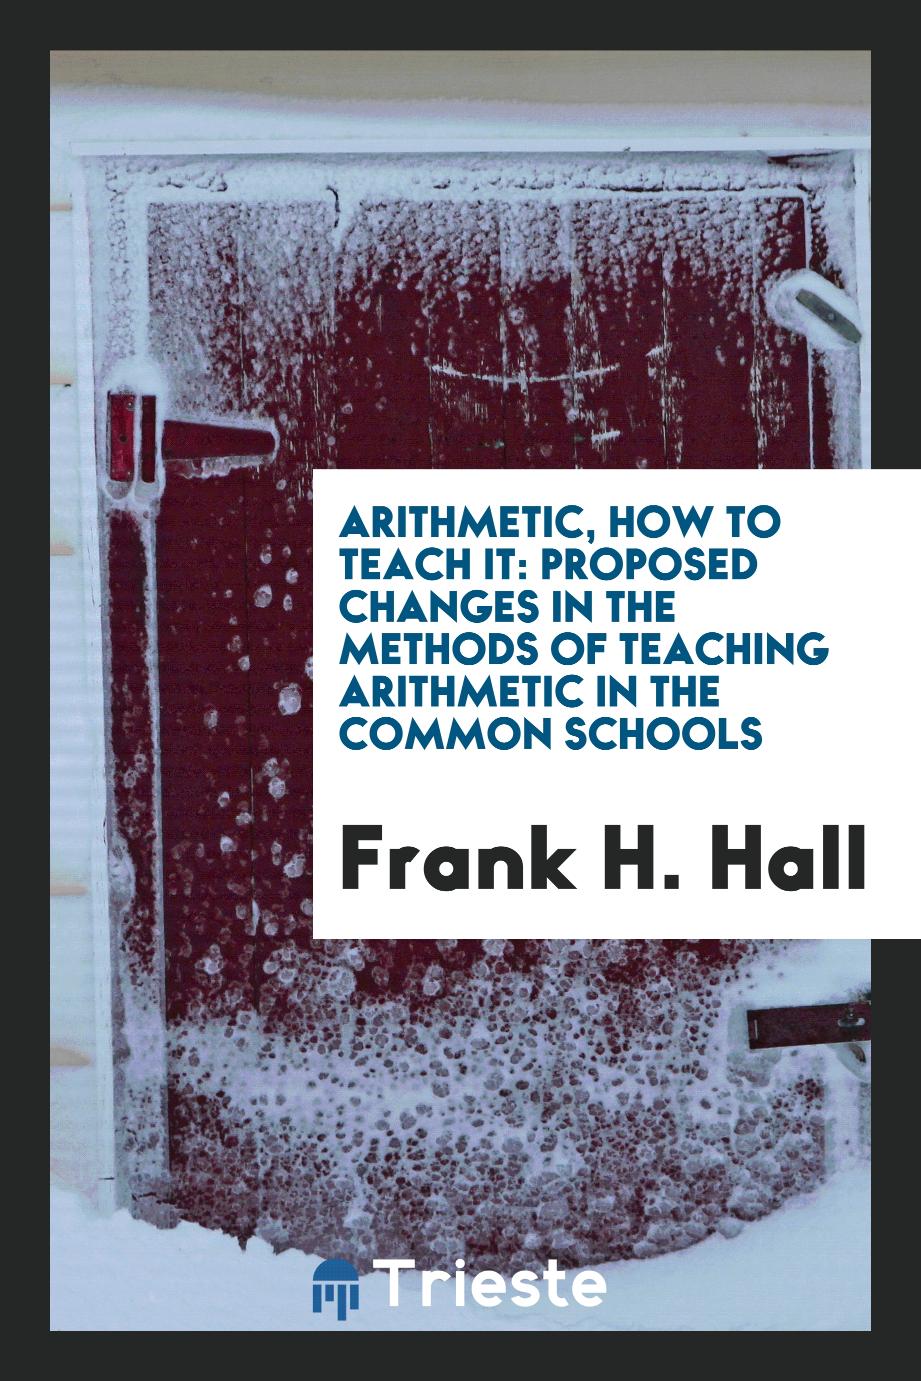 Arithmetic, how to Teach it: Proposed changes in the Methods of teaching arithmetic in the common schools